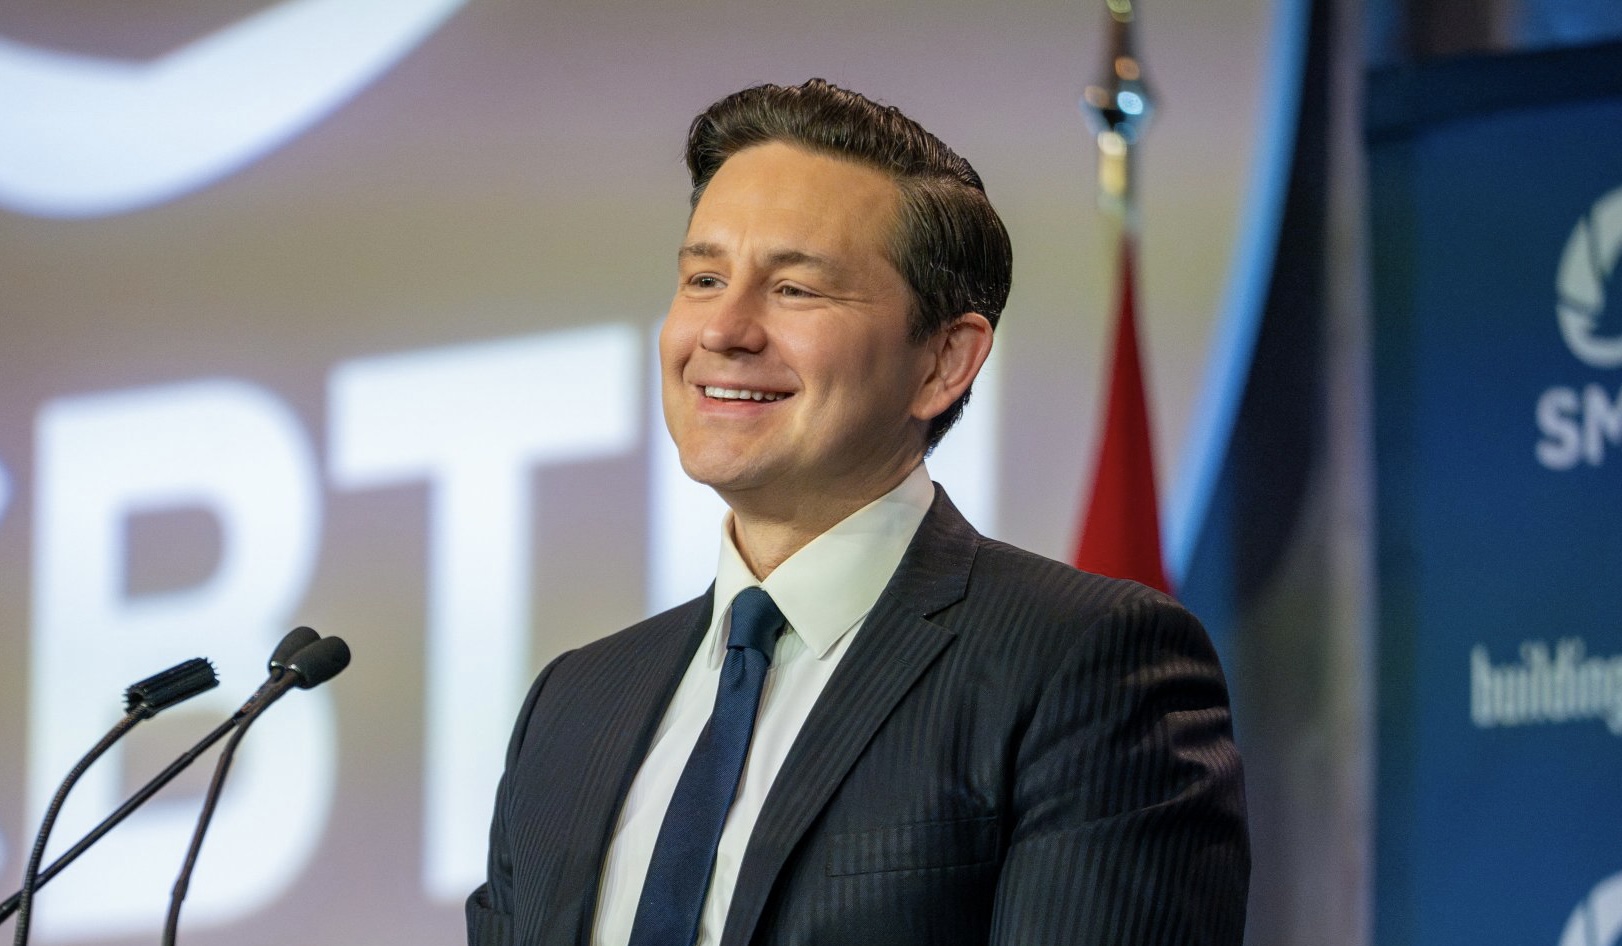 Montreal is the most anti-Pierre Poilievre city in Canada